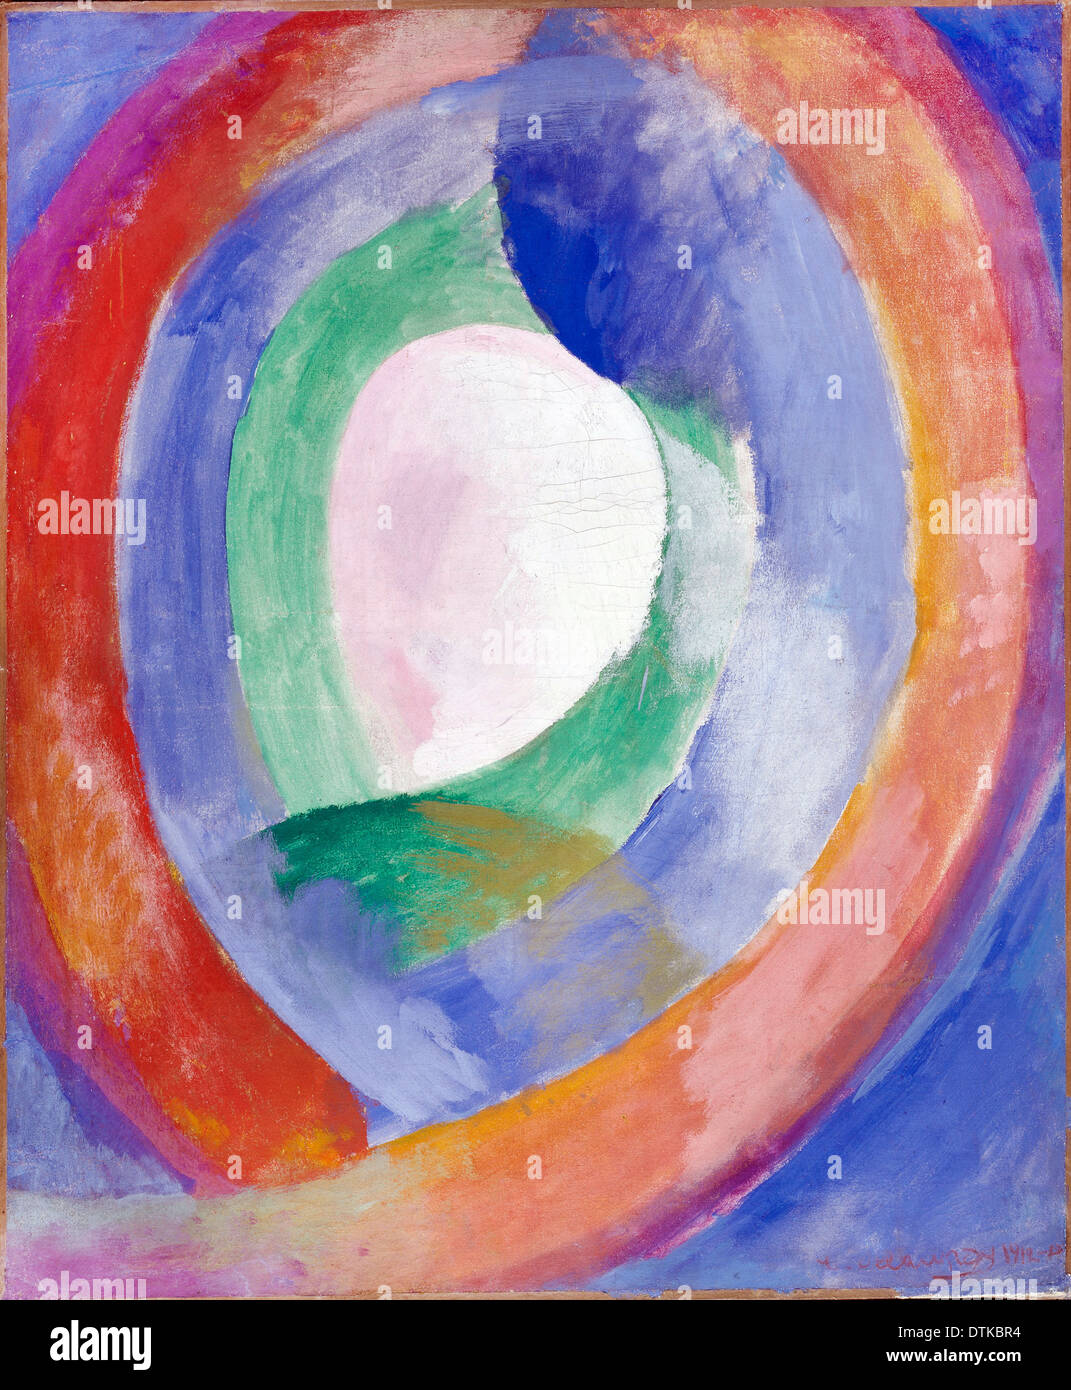 Robert Delaunay, Formes Circulaires; Lune no. 1. 1913 Oil on canvas. Dresden City Art Gallery, Germany. Stock Photo